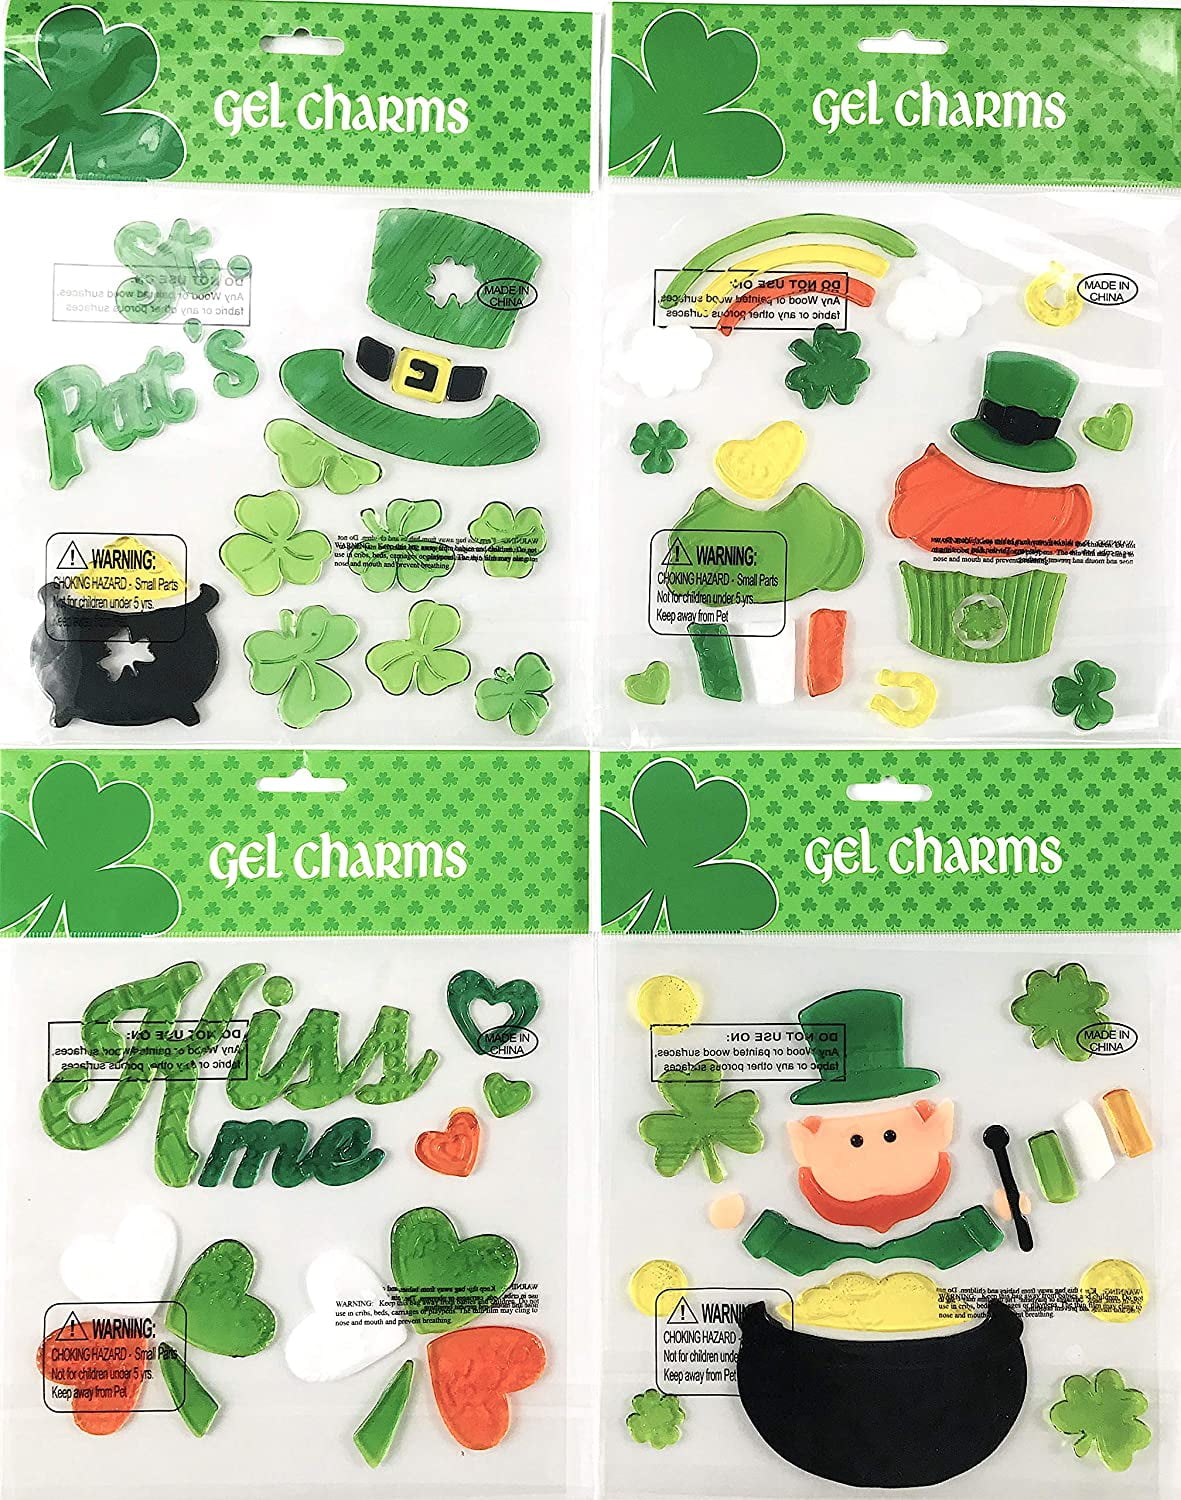 Patricks Day Decorations Owl Golden Horseshoes and Coins and More Window Gel Clings with Shamrocks St Three-Leaf Clovers 4 Sheet Set 